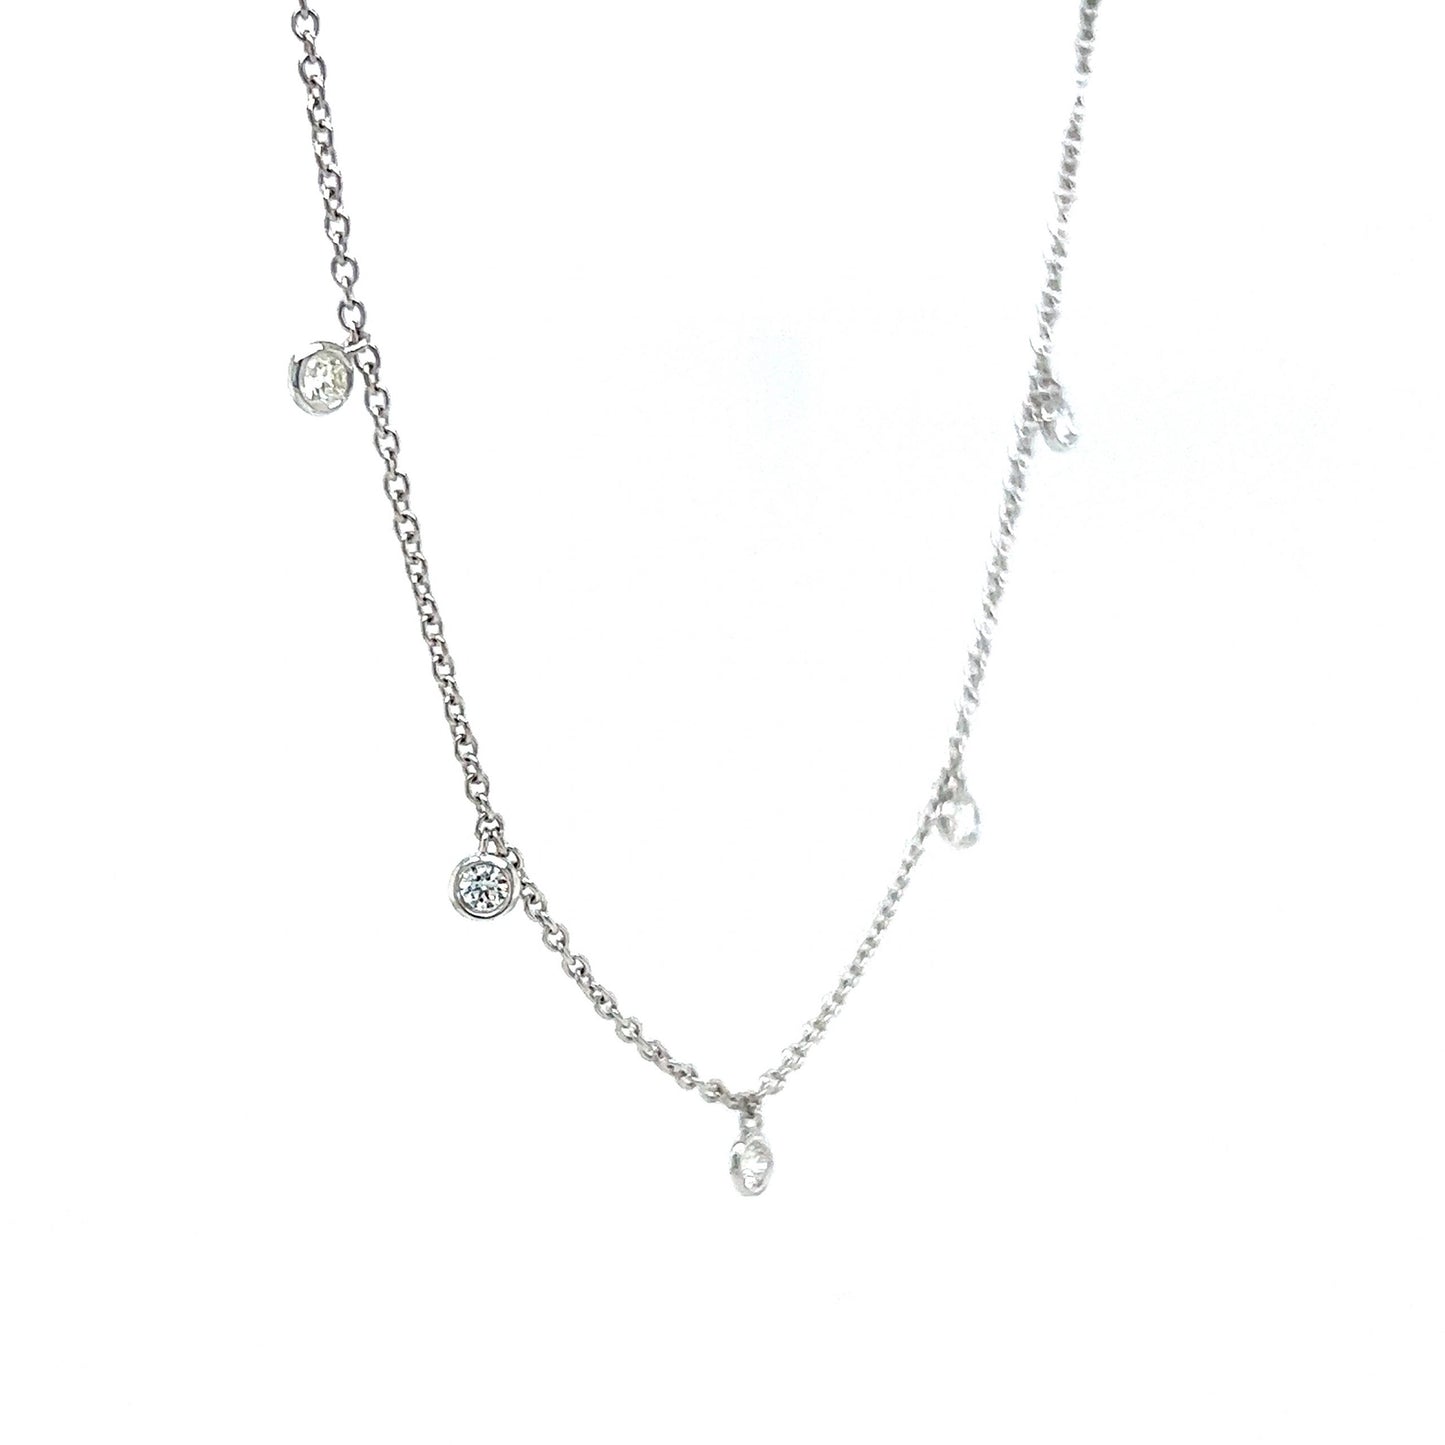 Dangling Round Diamond Bezel Necklace in 14k White Gold